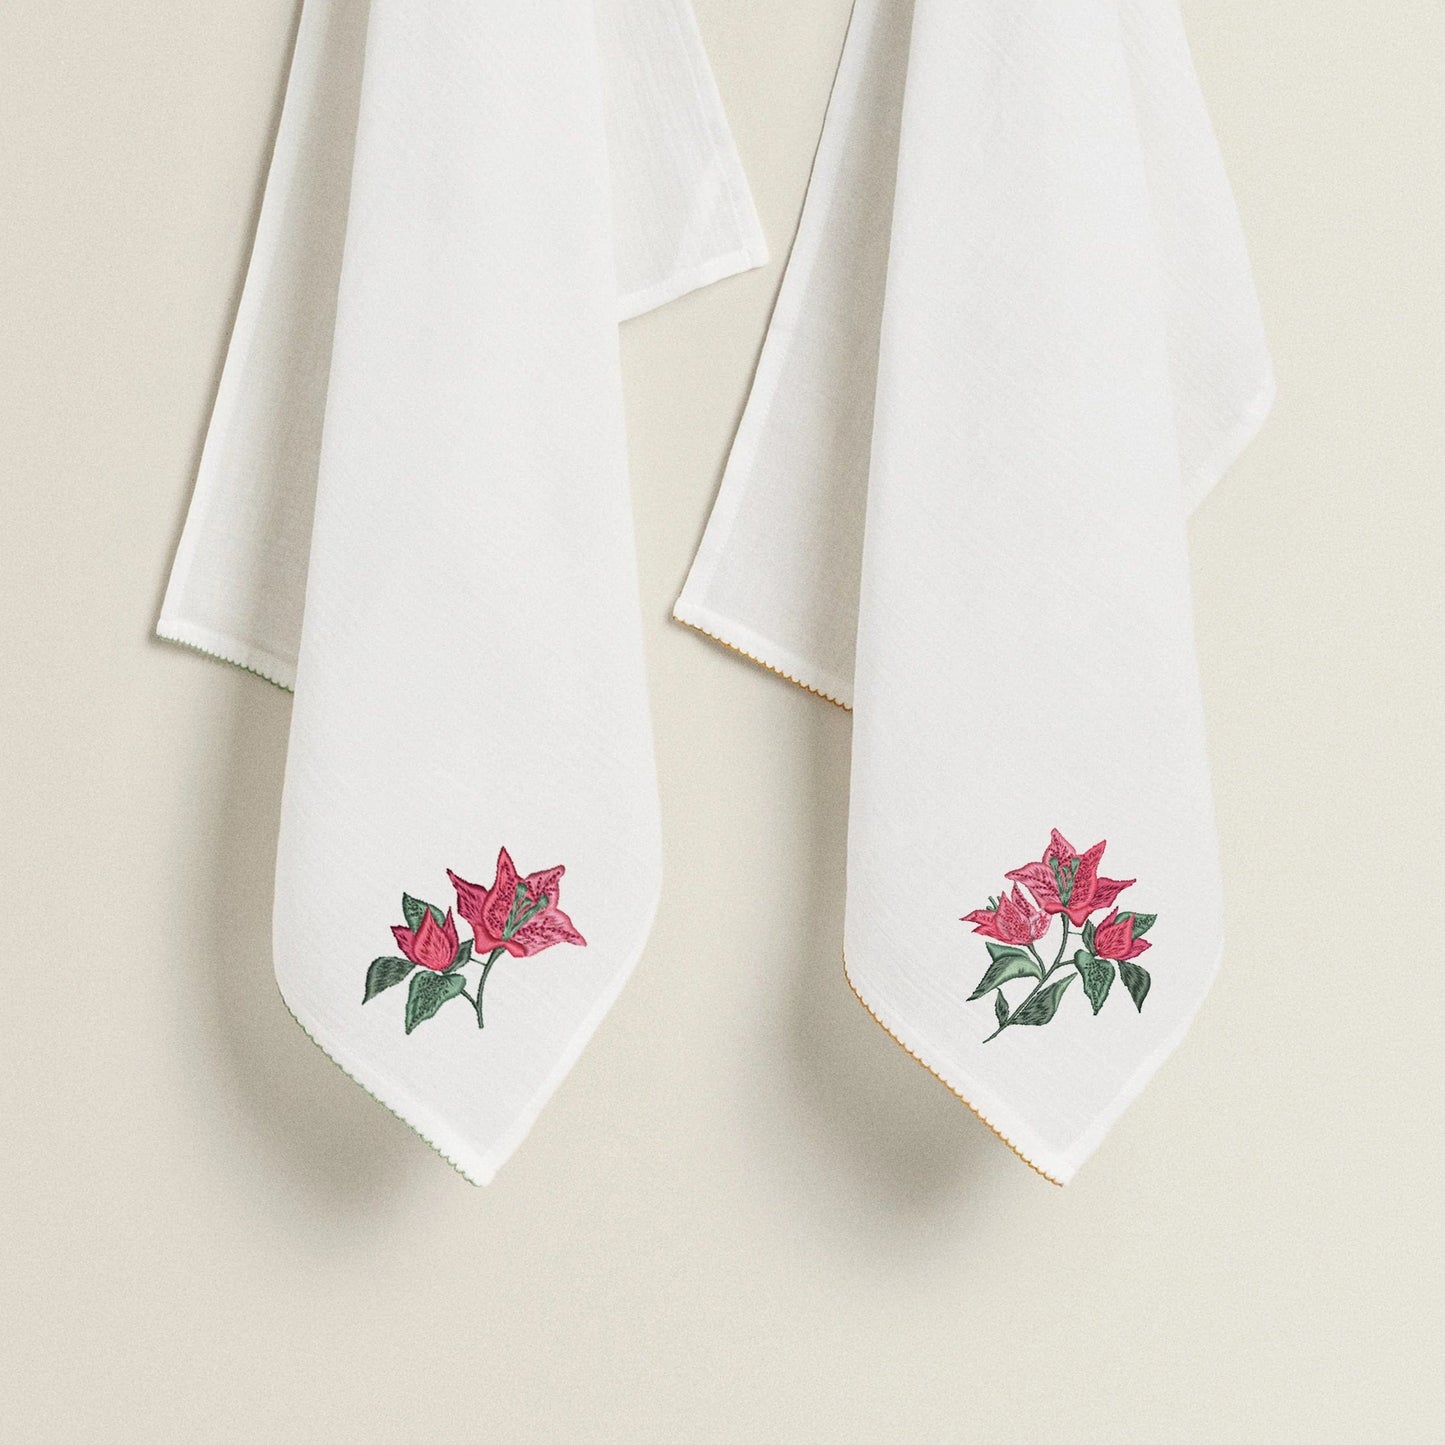 Bougainvillea Flower Machine Embroidery Design on towels